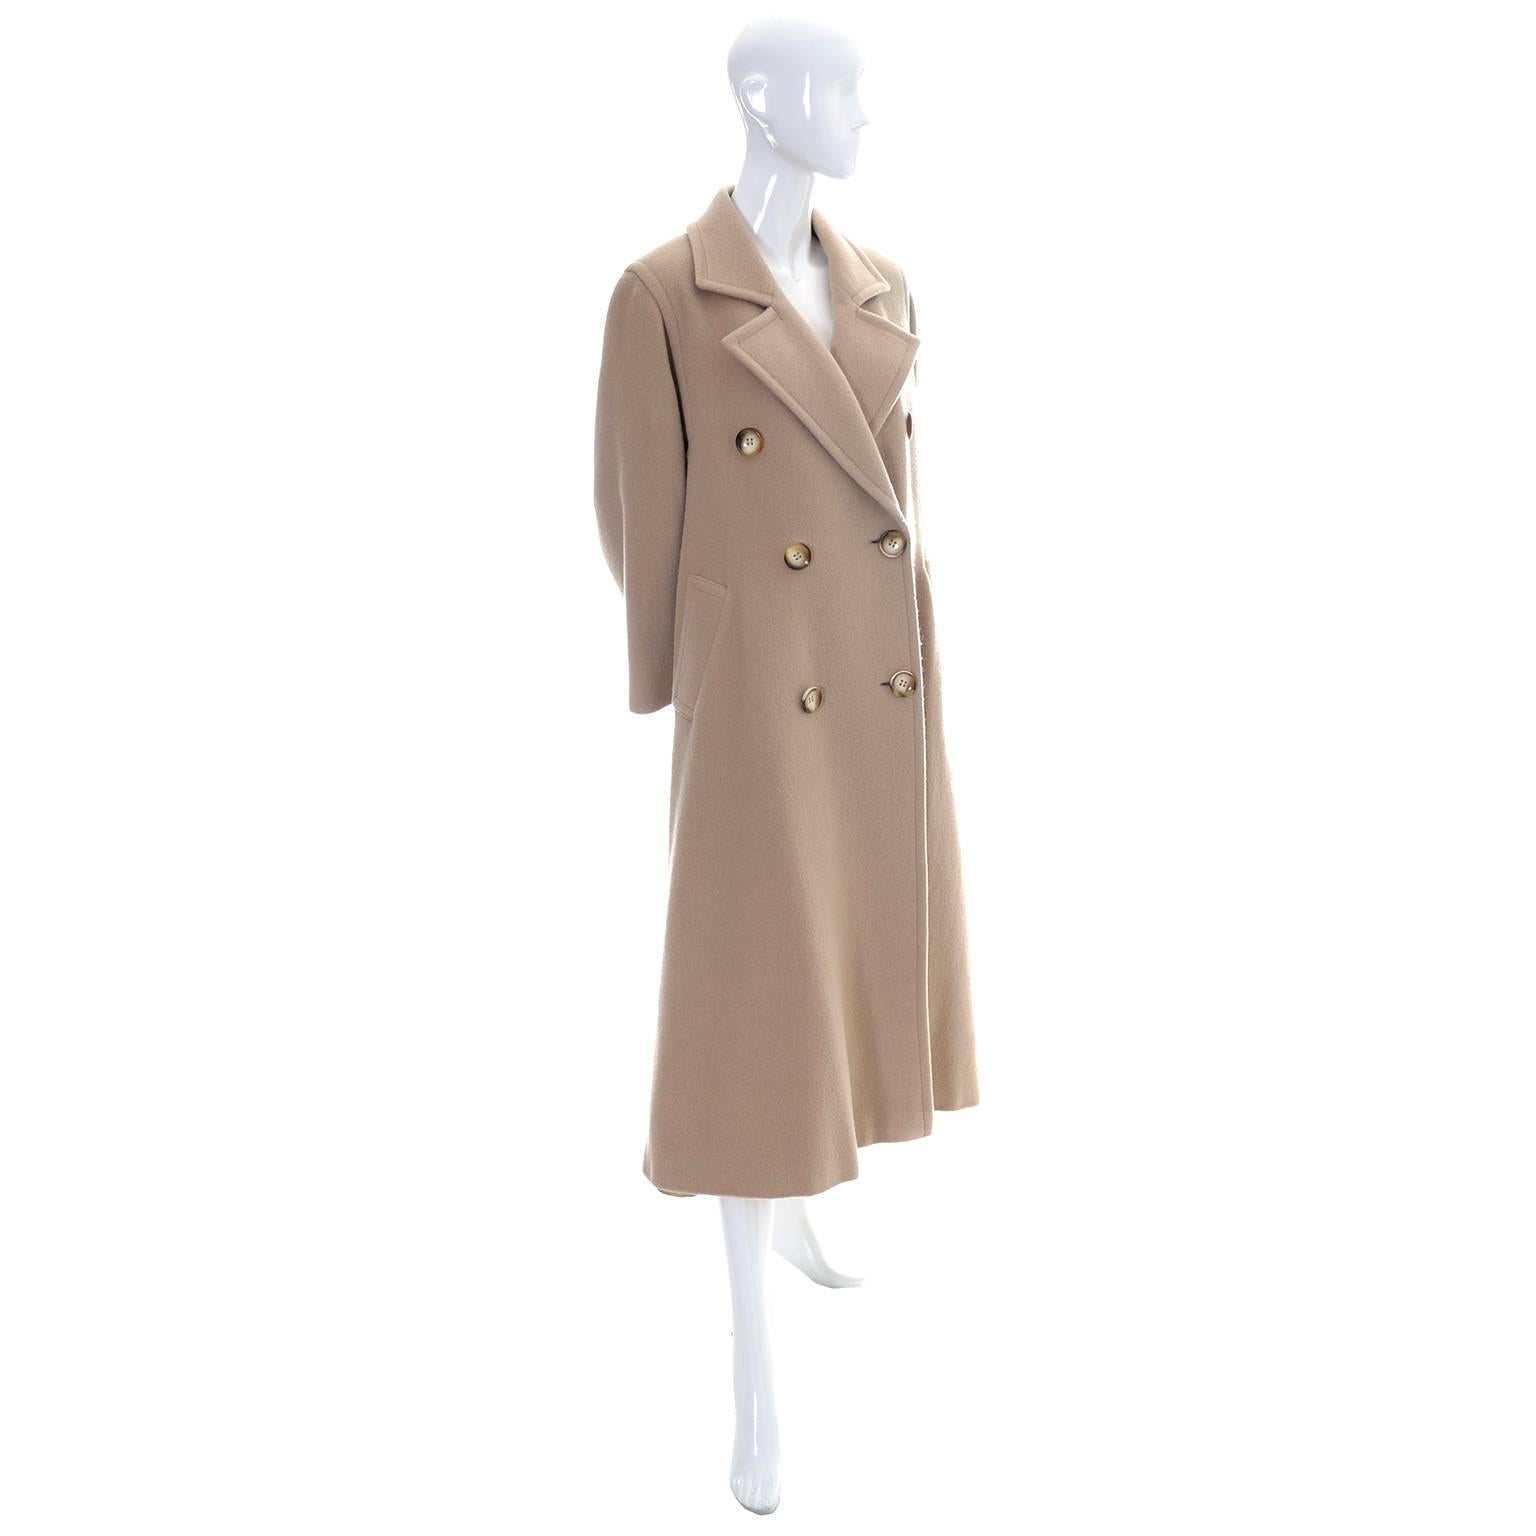 This beautiful vintage coat is from Valentino and has the Miss V label and is in excellent condition.  The coat is also labeled a size 38 (4). This coat is fully lined and is made of 50% Mohair, 30% Wool and 20% Polyamide.  There are side slit